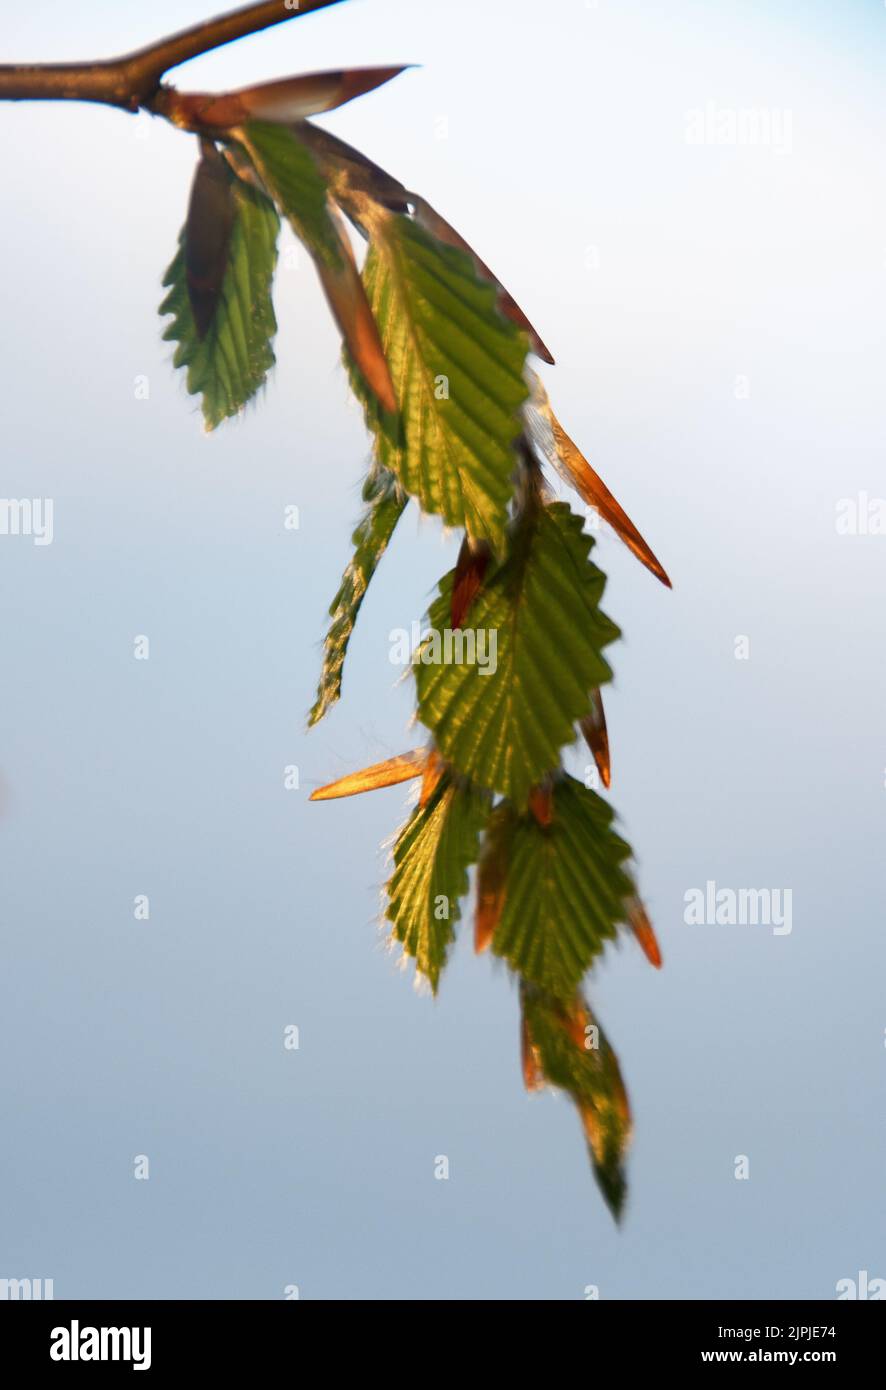 A spray of young beech leaves Stock Photo